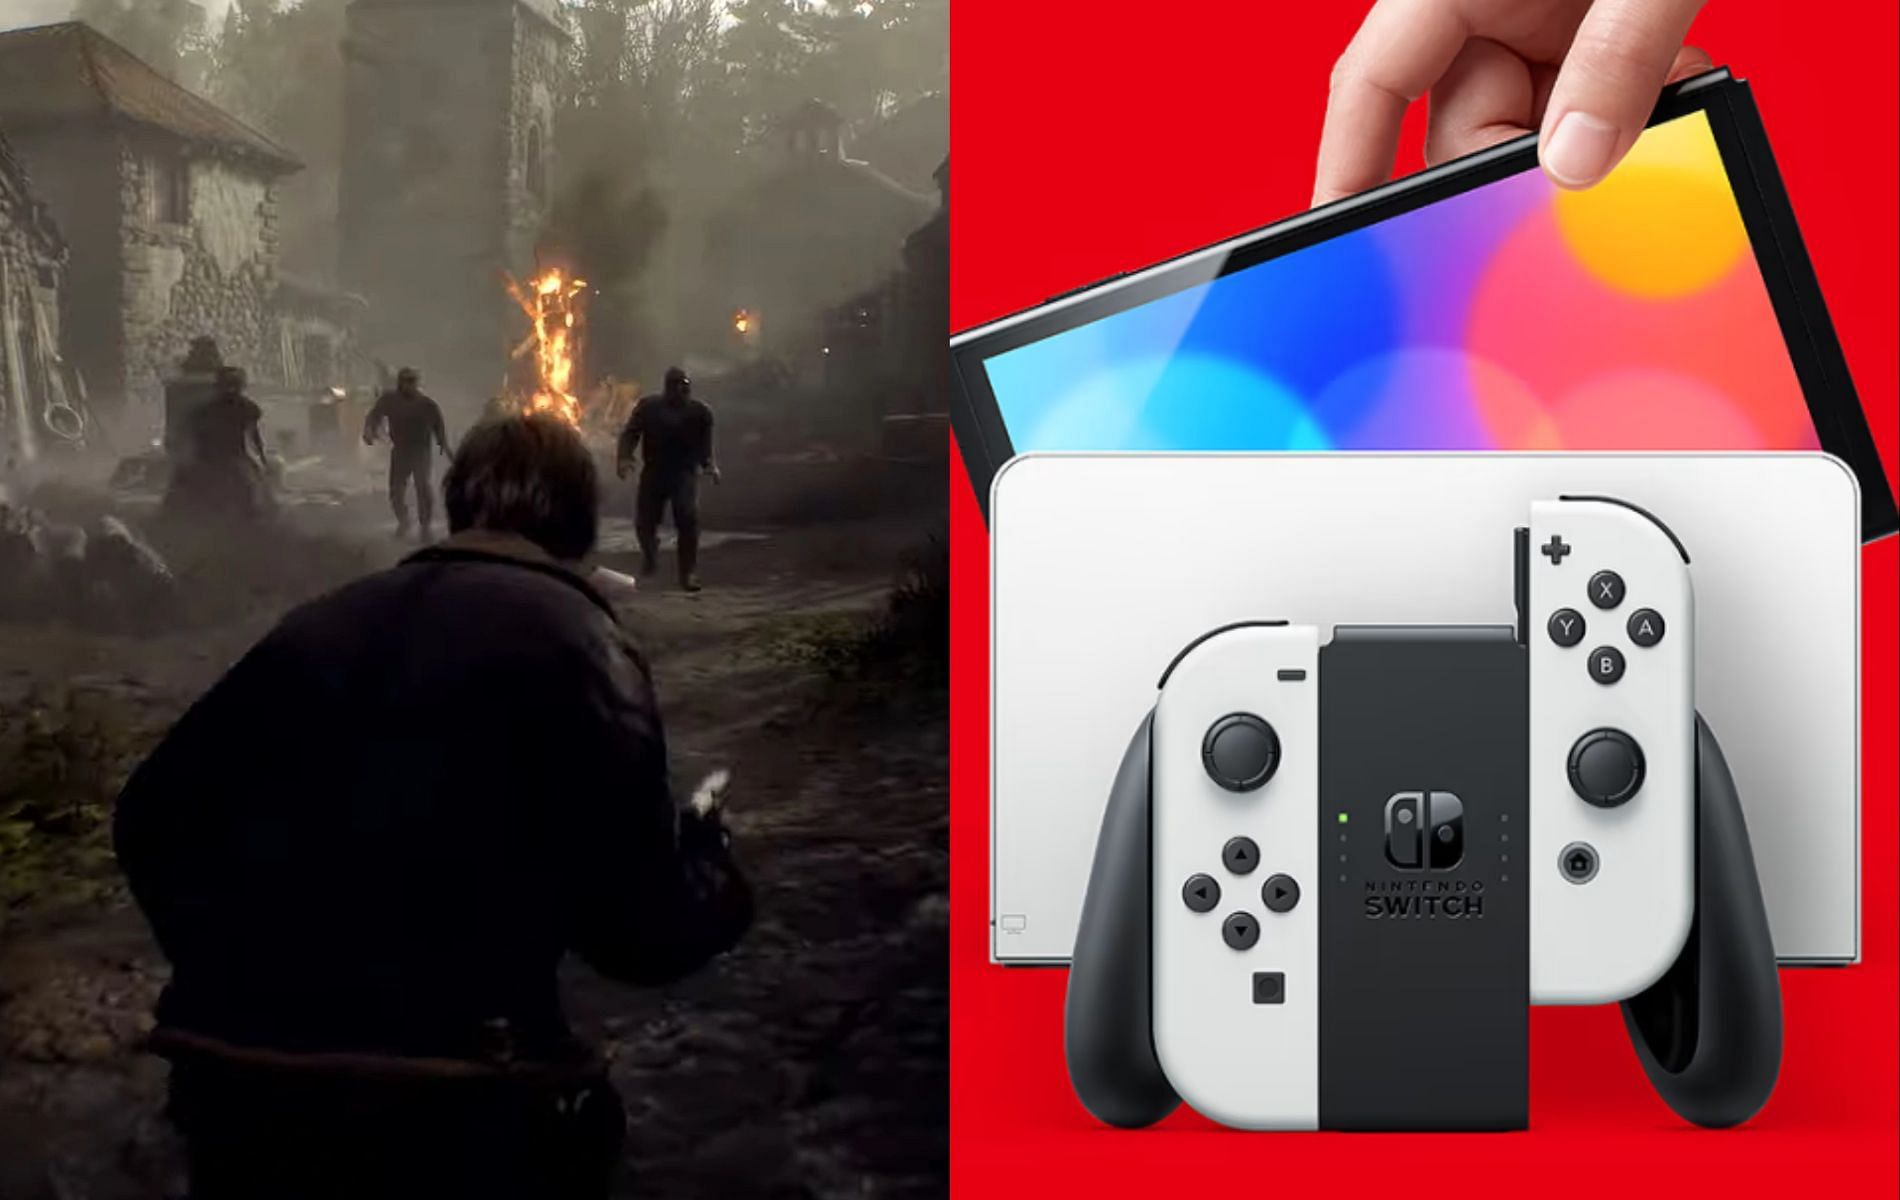 Resident Evil 4, REmake & Zero Are Coming To Nintendo Switch